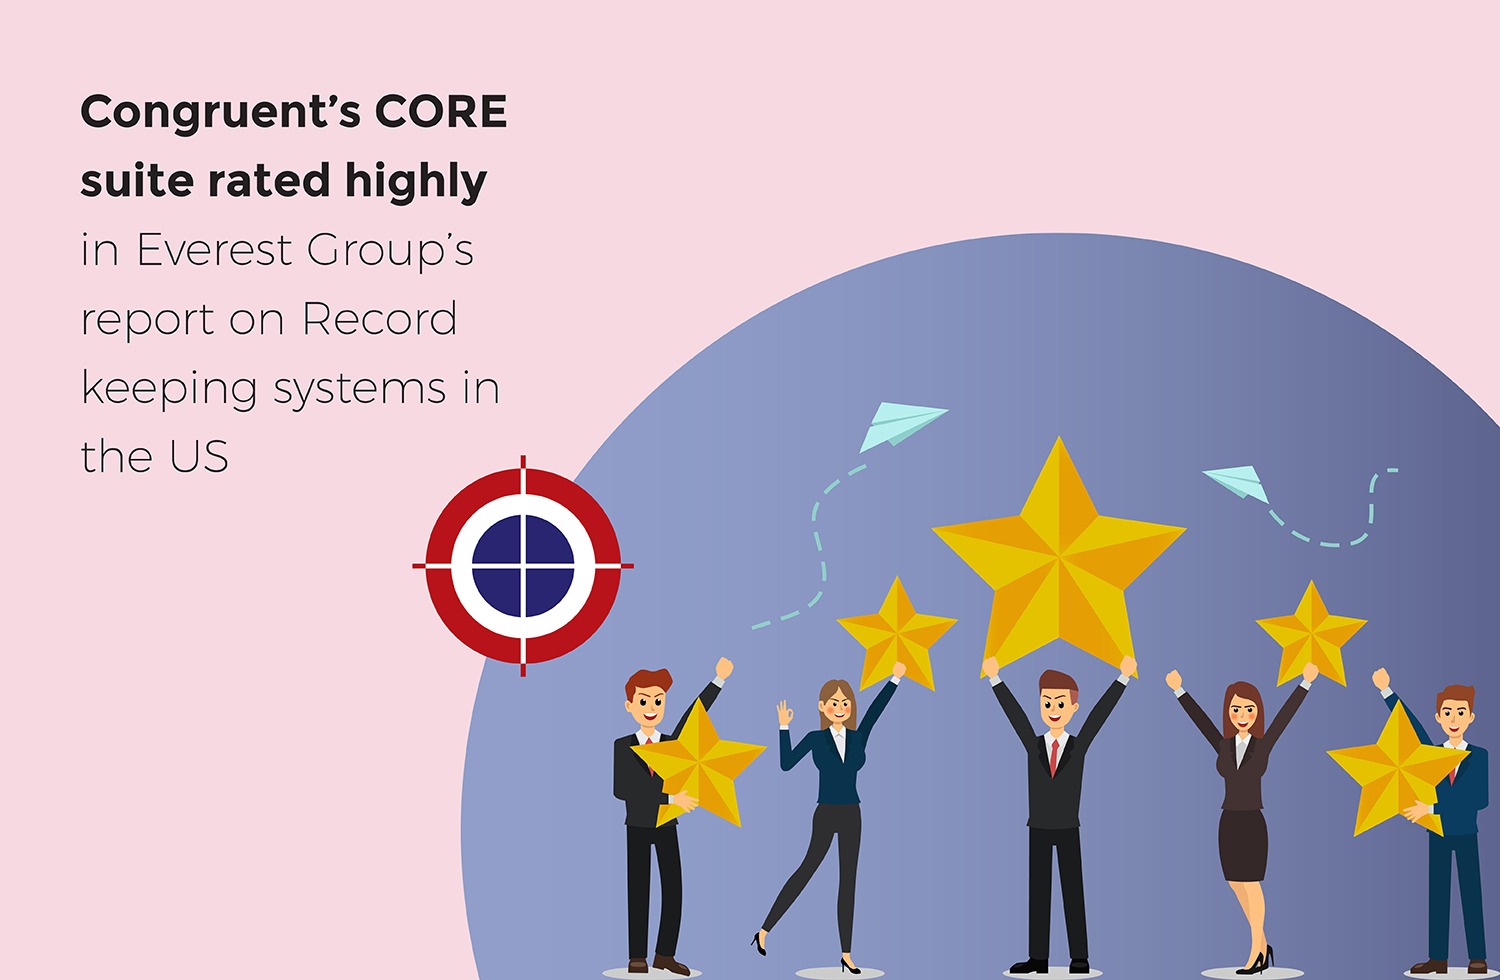 Congruent’s CORE suite gets recognition in Everest Group’s report on cloud-enabled record-keeping systems in the US